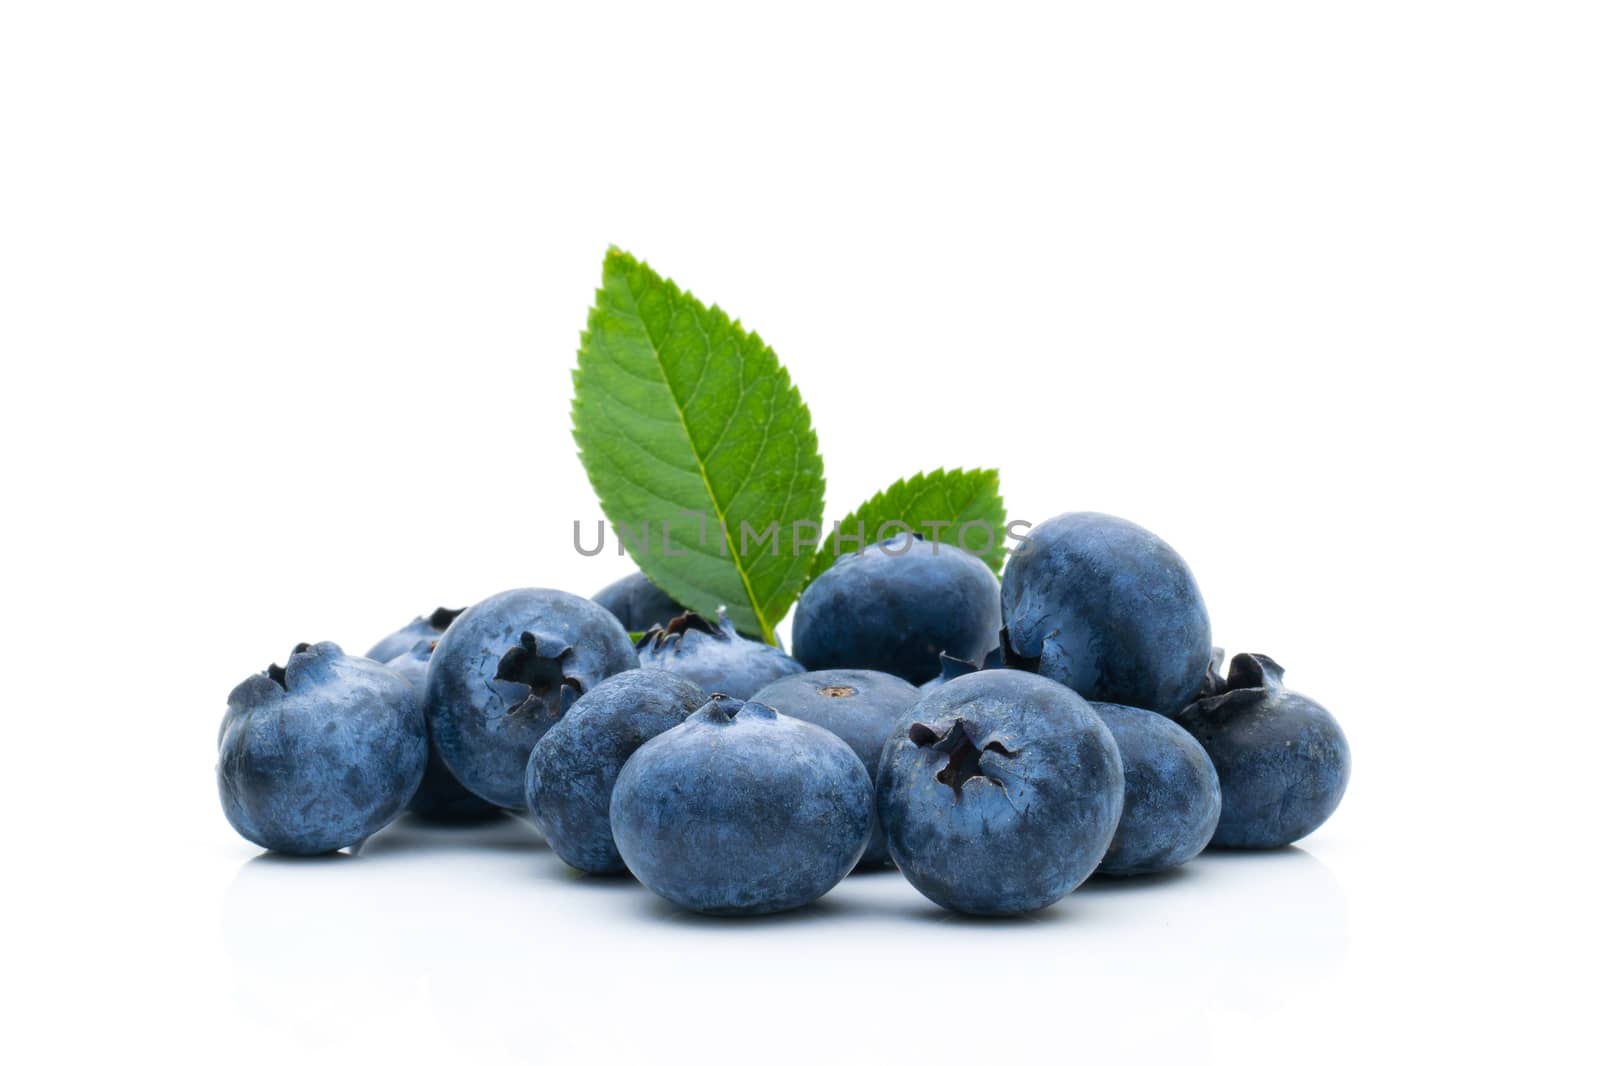  Blueberry fruit on a white background by sompongtom